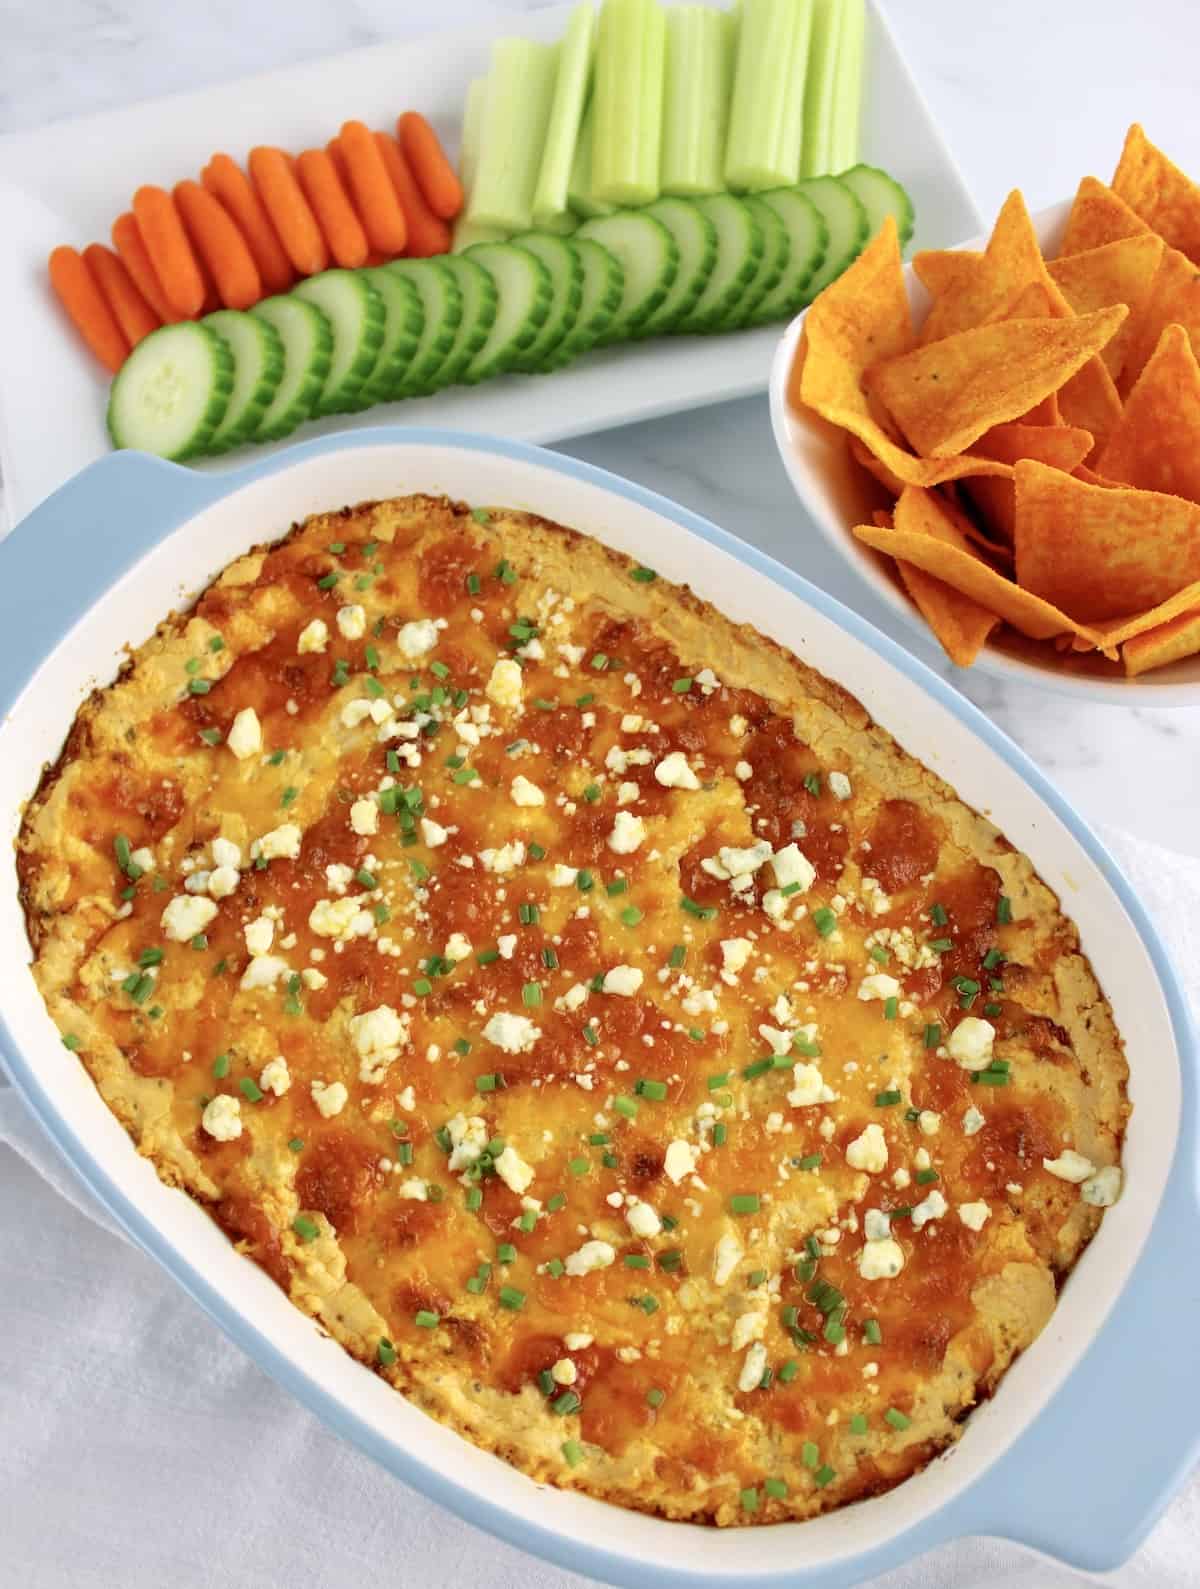 Buffalo Chicken Dip in baking dish with sliced veggies and tortilla chips in background